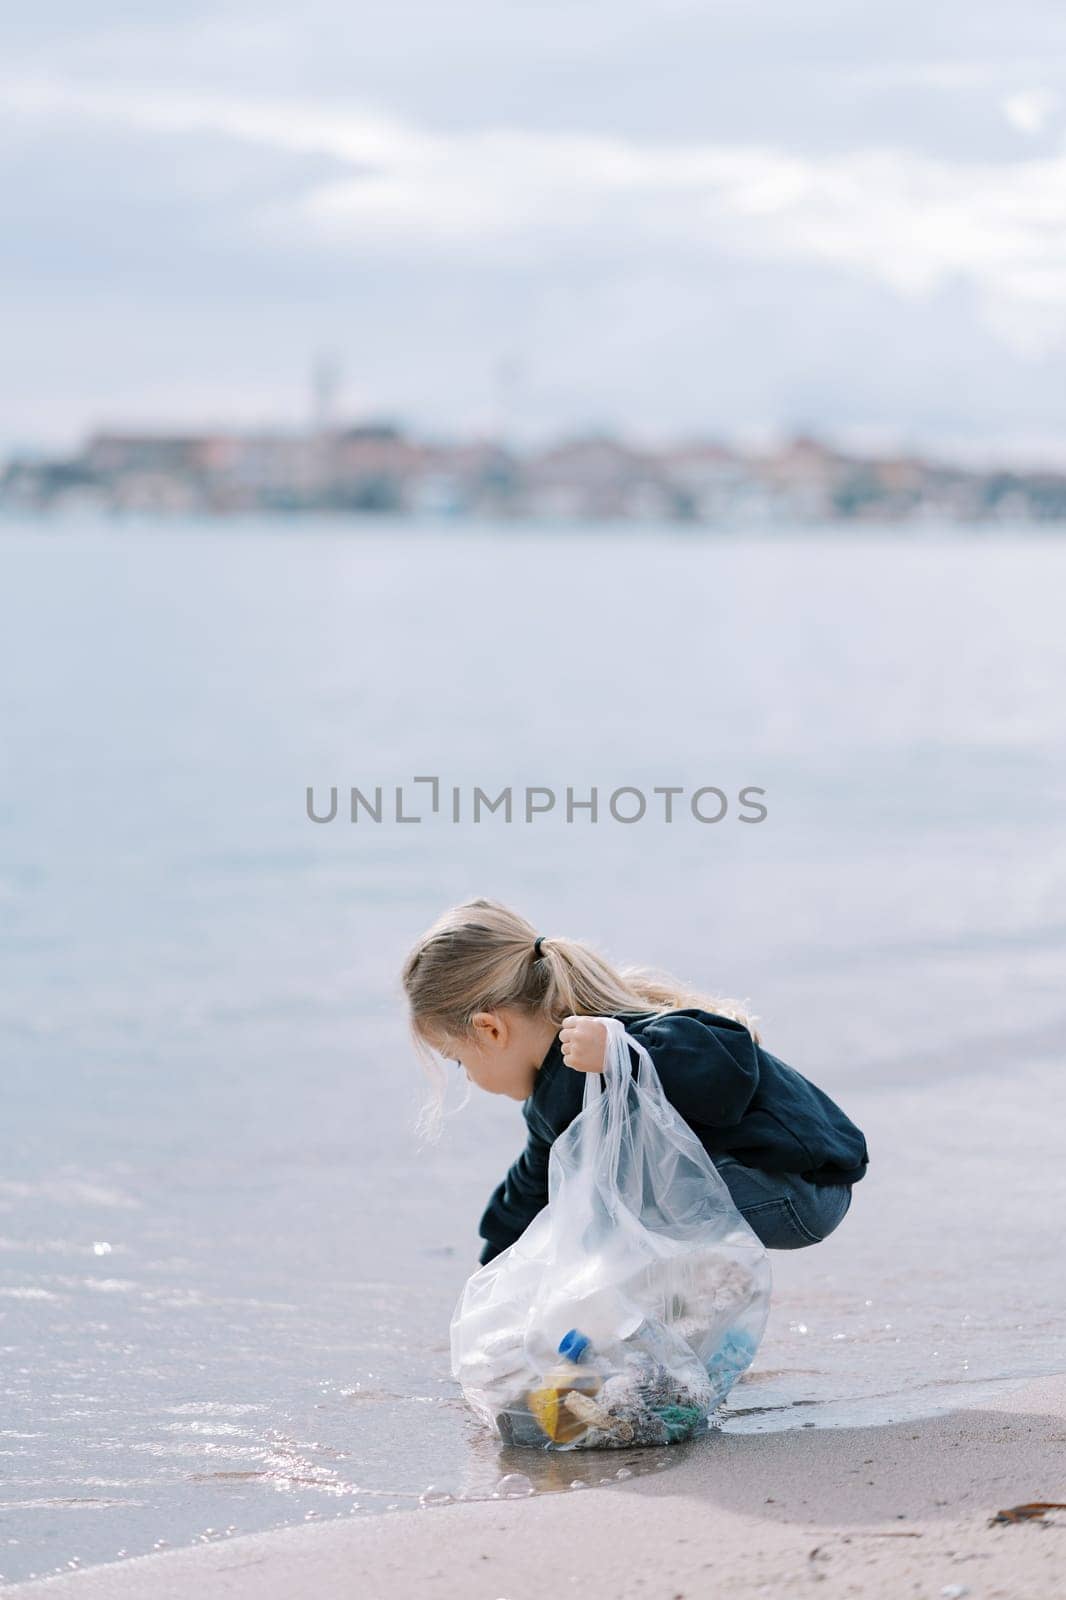 Little girl with a bag squats by the sea and collects garbage. High quality photo